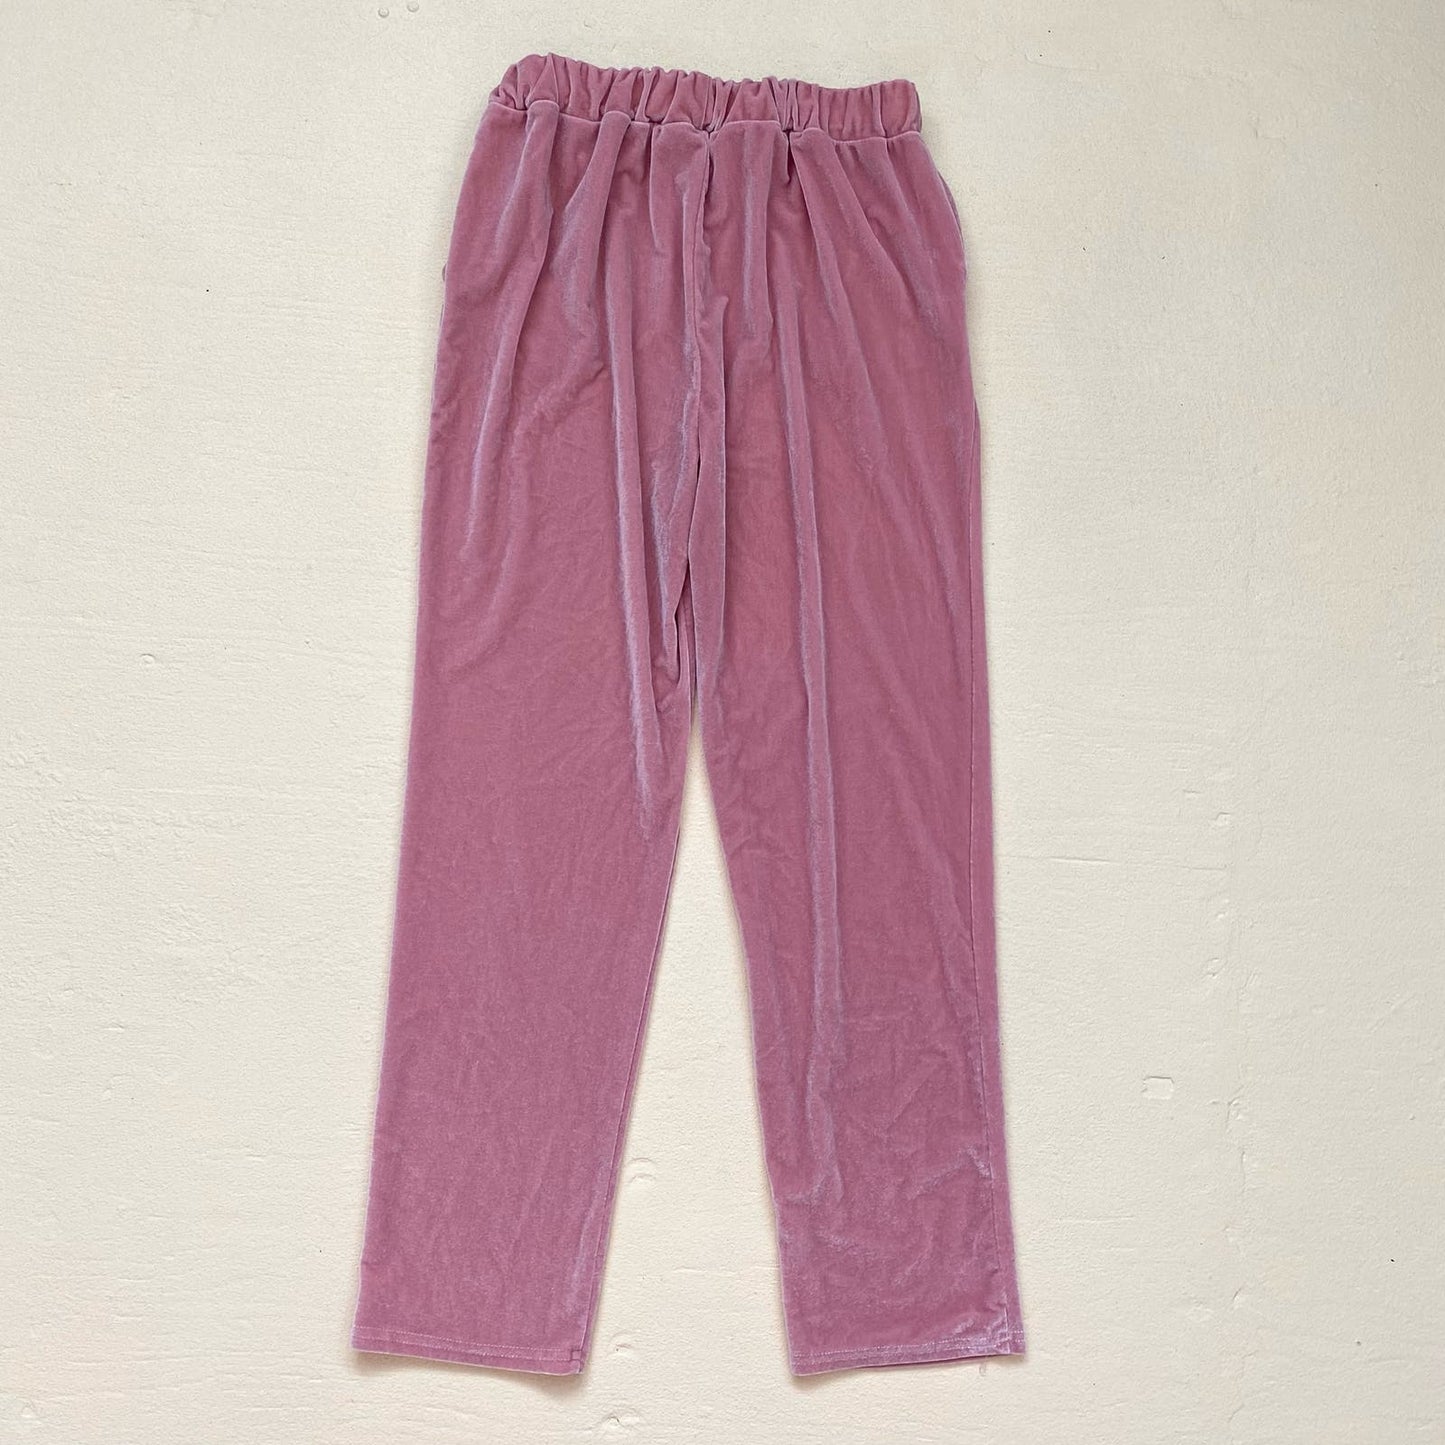 Secondhand Pink Velvet Straight Leg Trouser Stretch Pants, Size Small